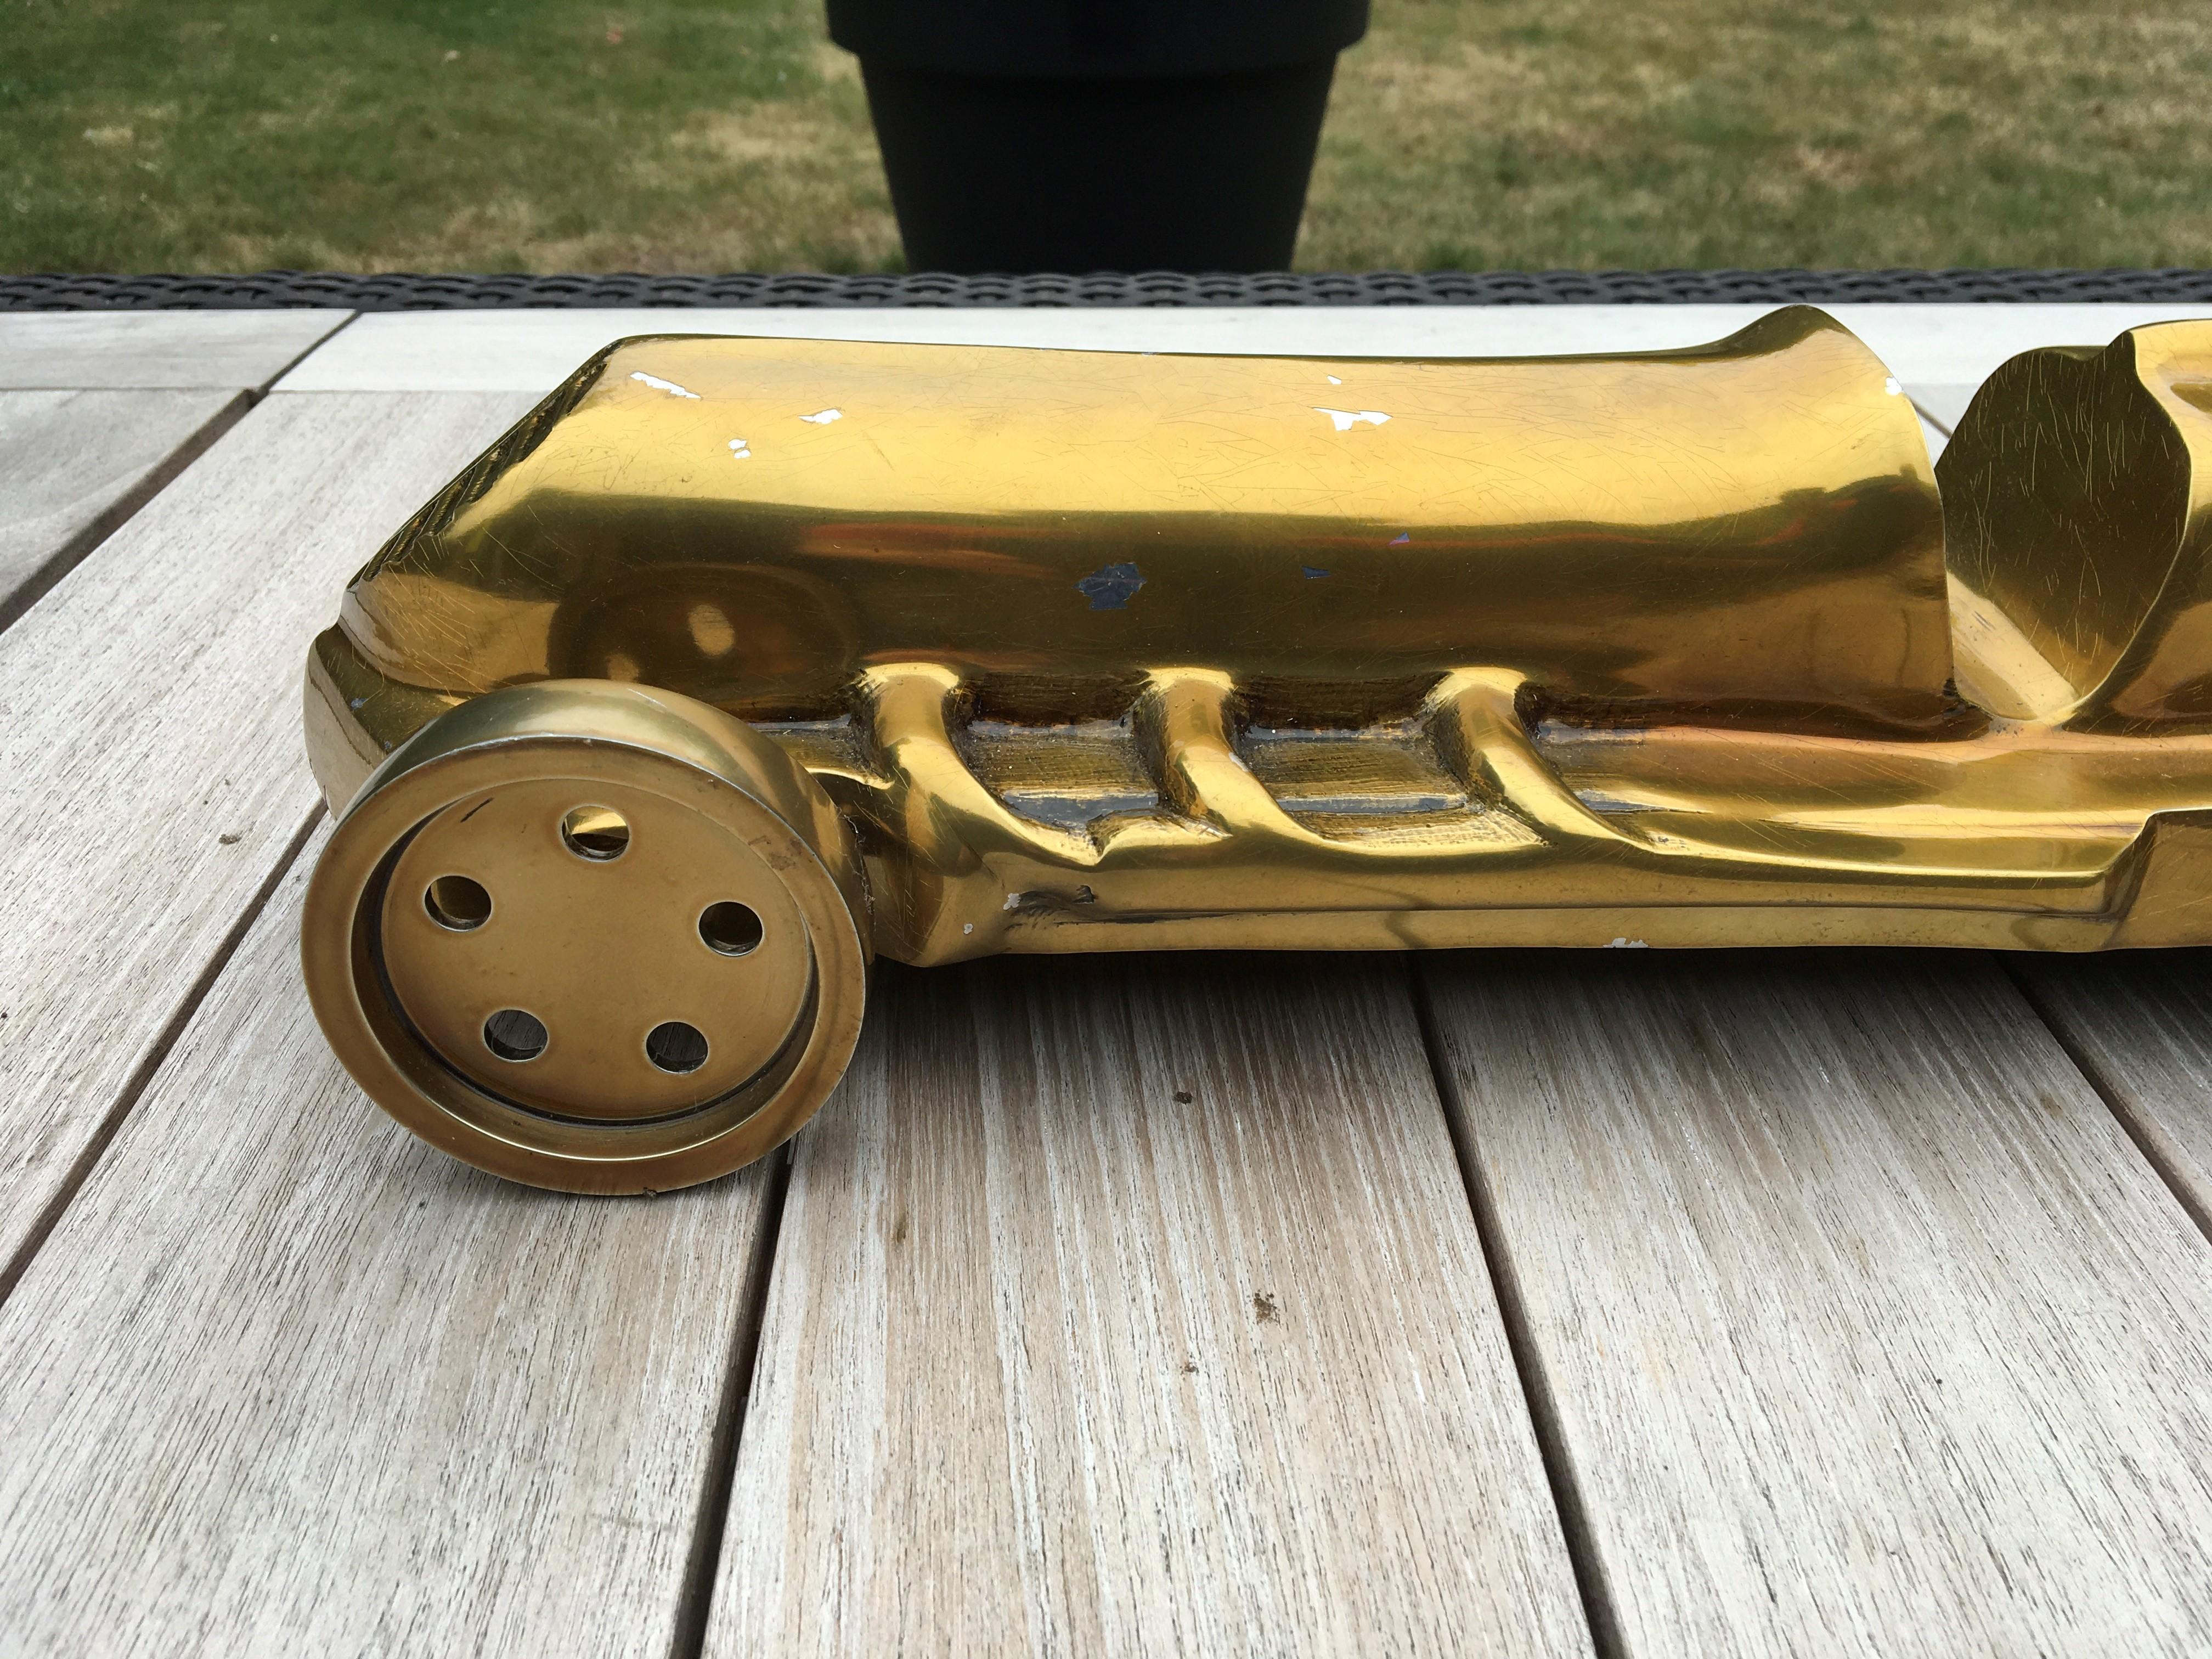 cars made of gold